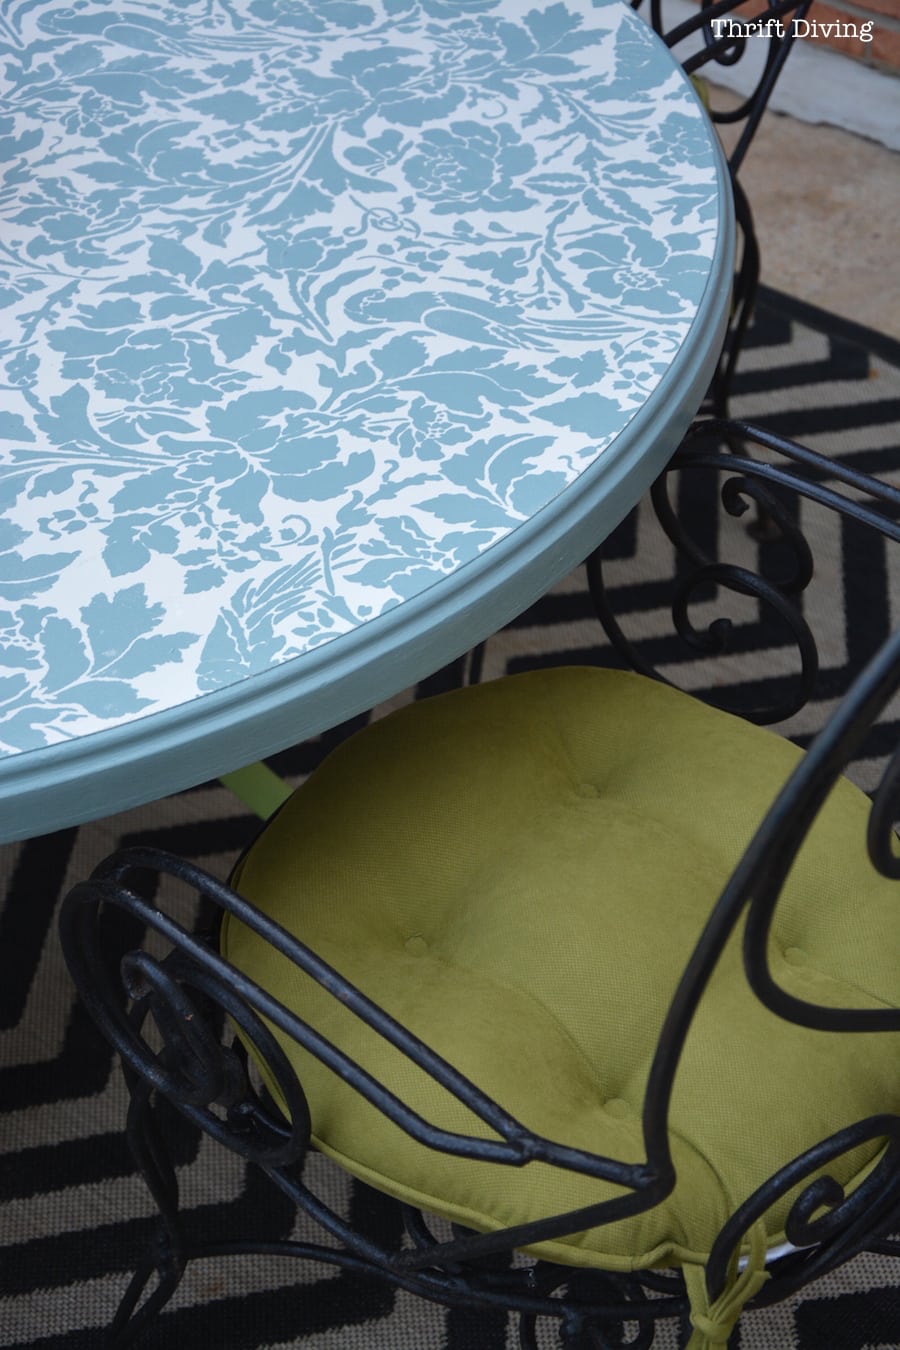 Outdoor Furniture - AFTER 1 Thrift Diving